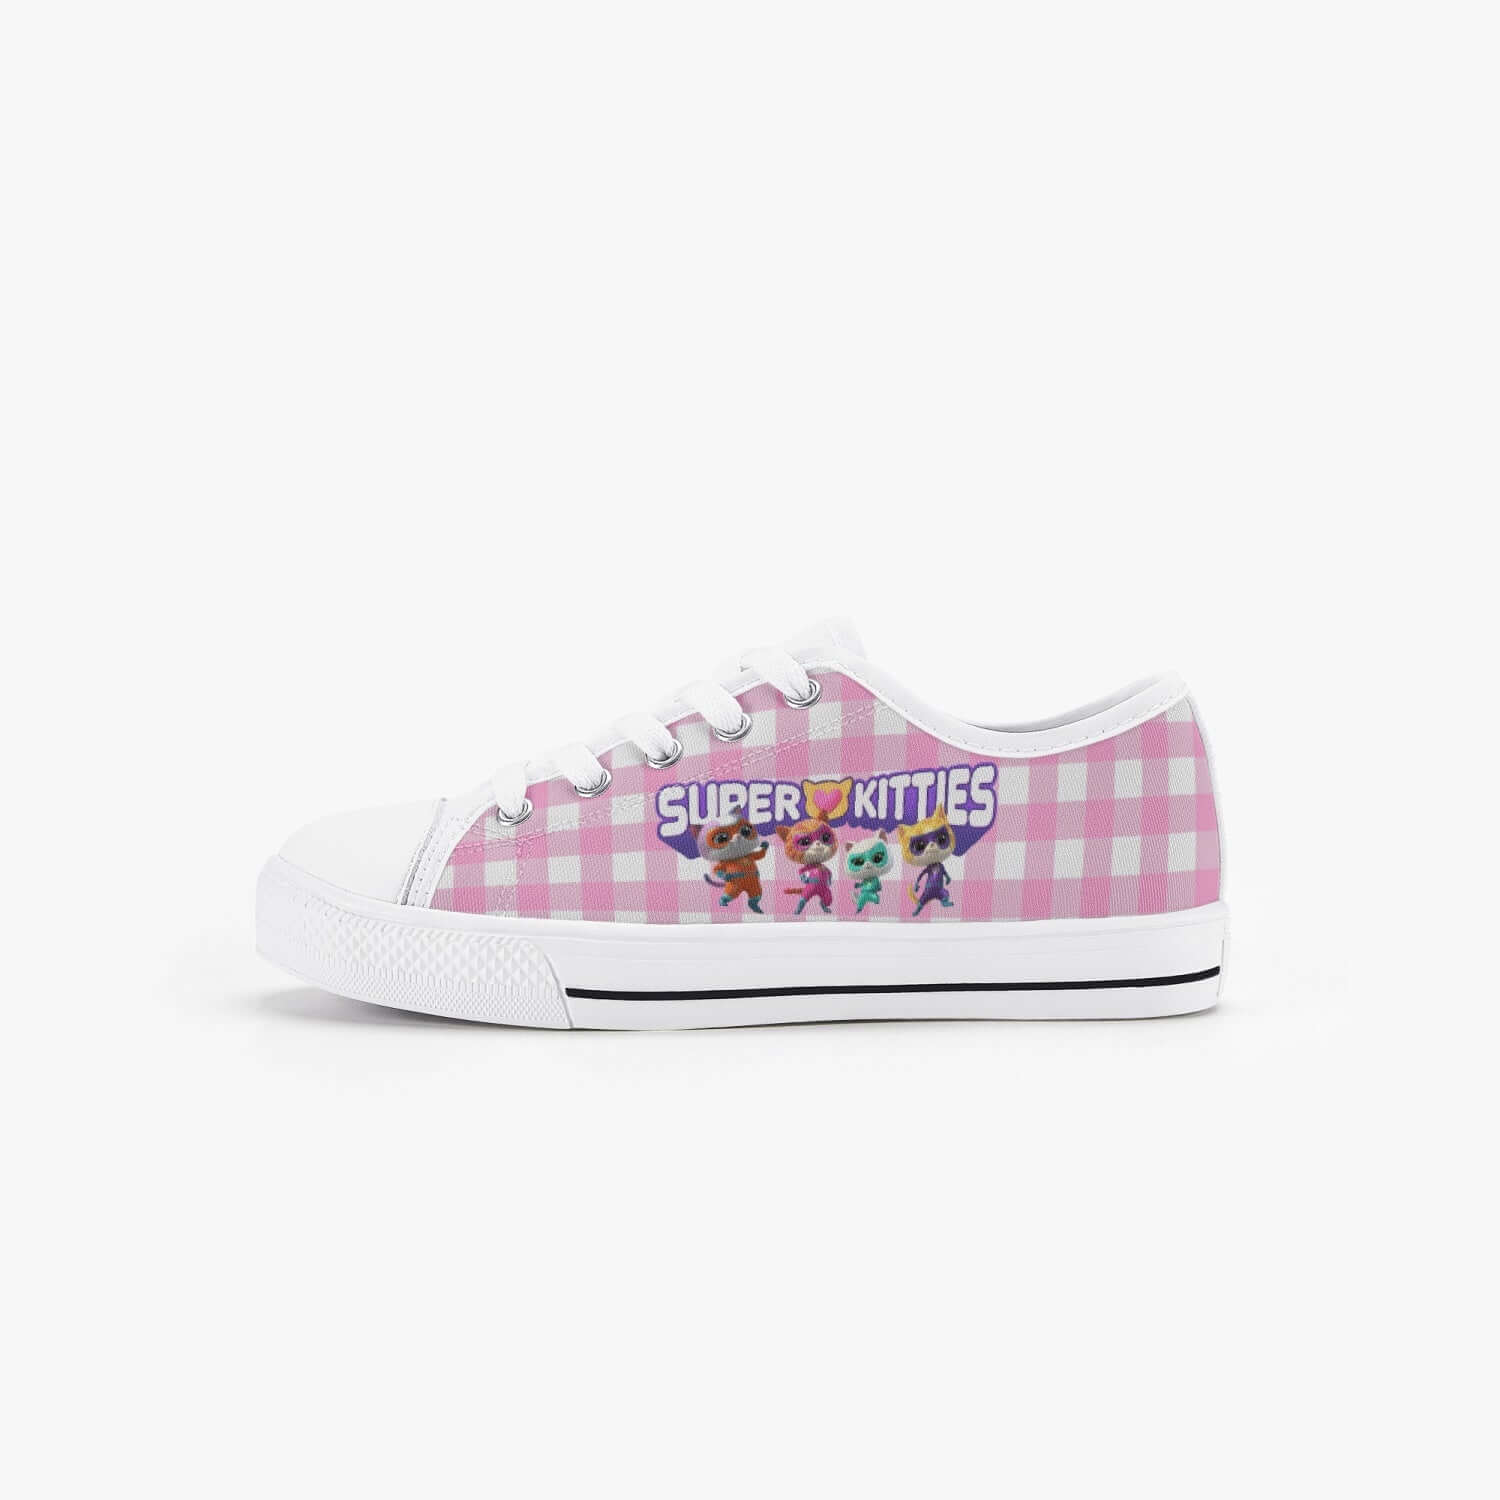 Girl's Super Kitties Low Top Canvas Shoes Sneakers